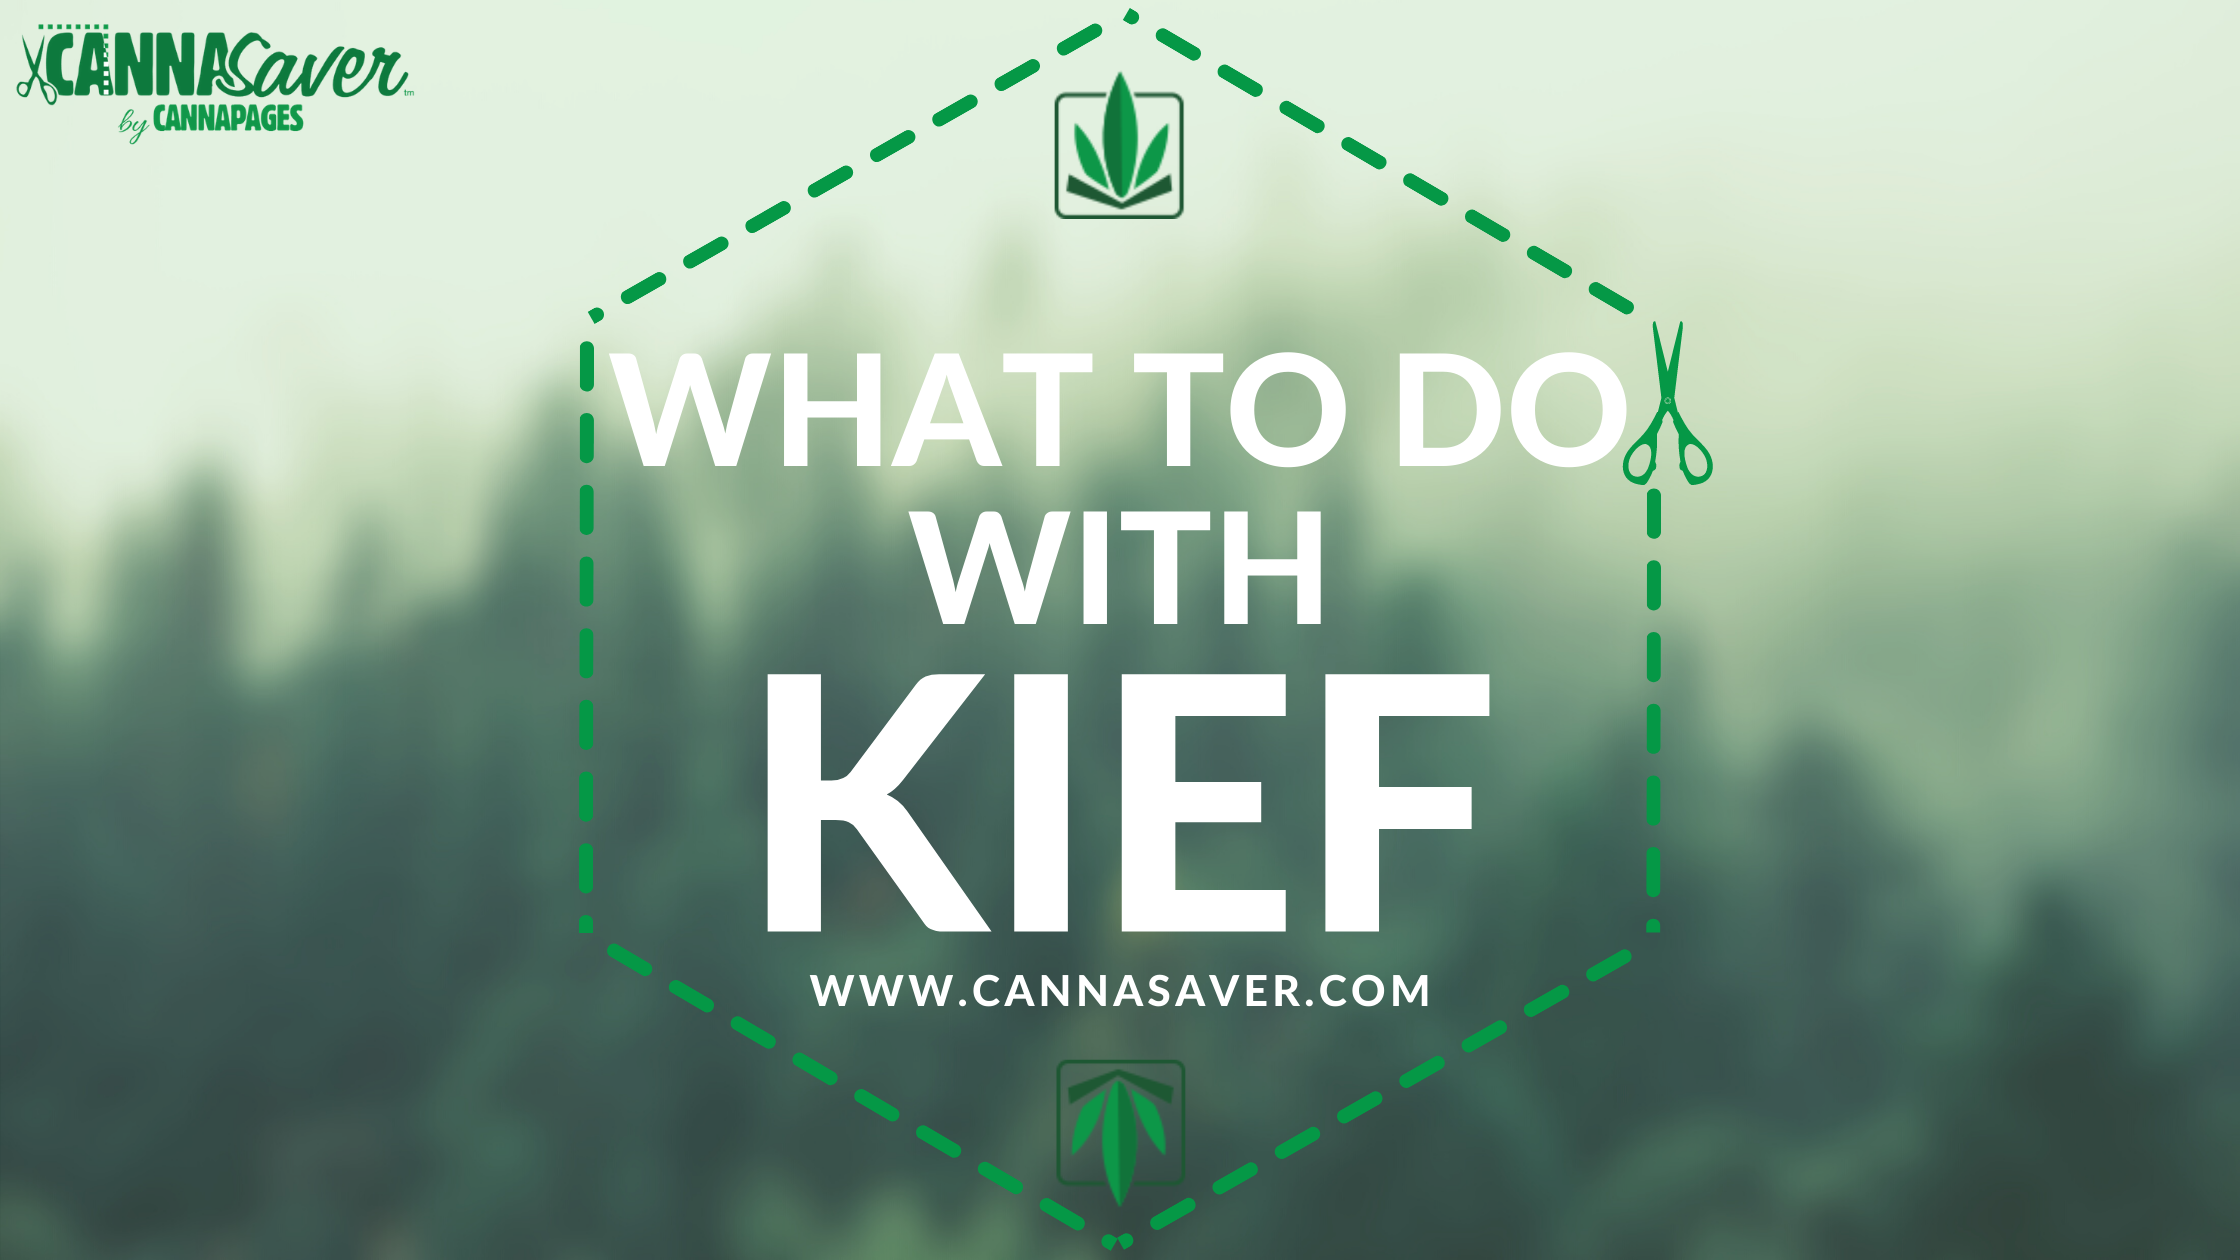 What Can You Do With Kief?